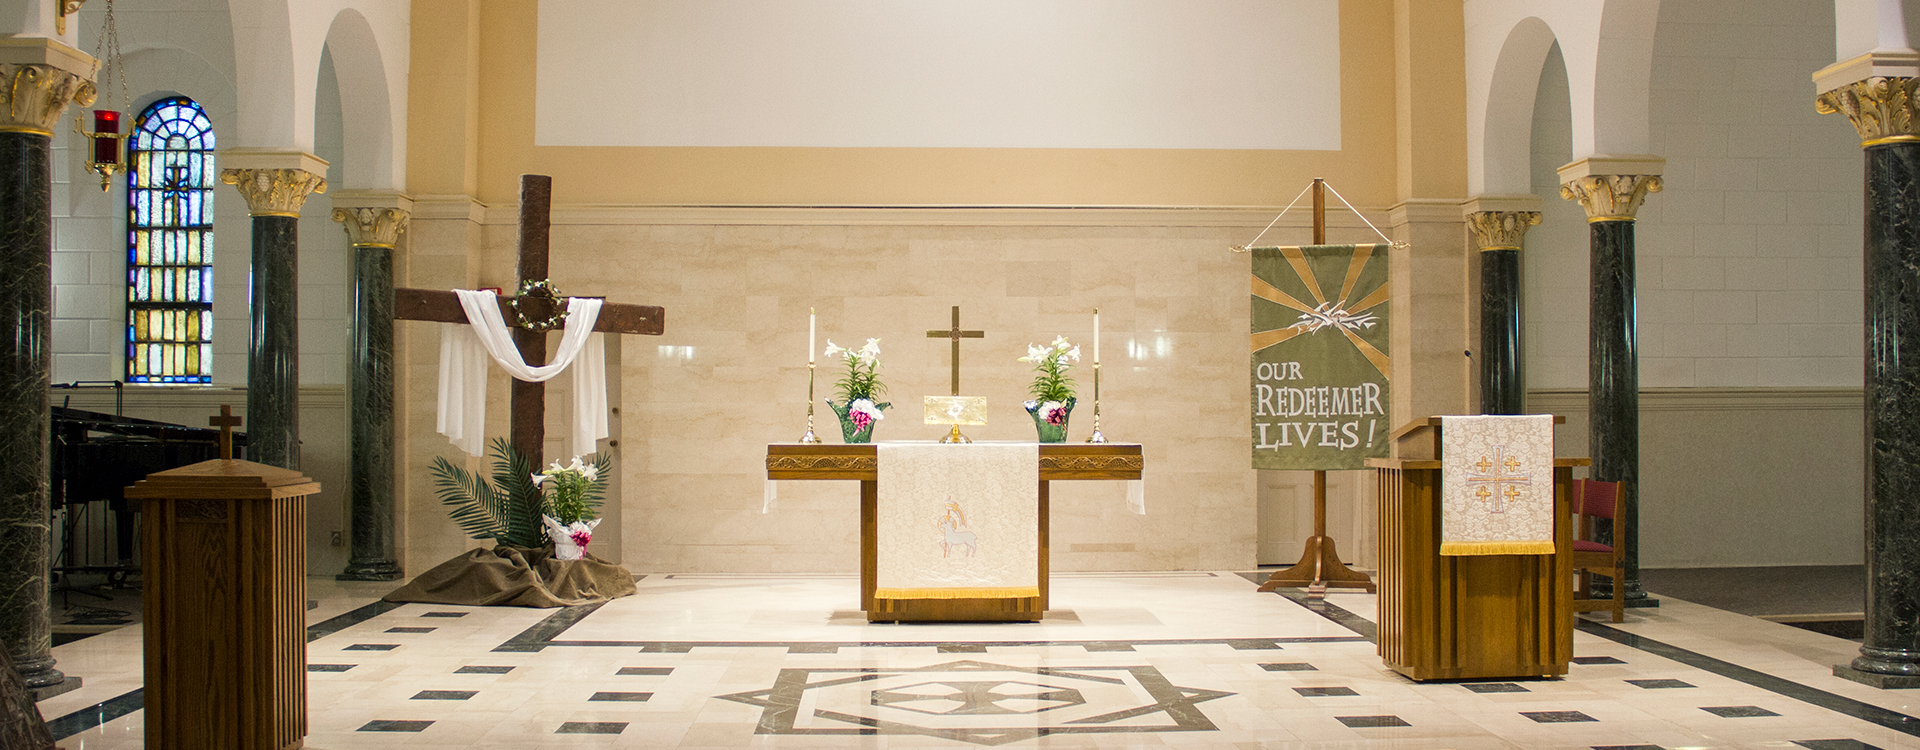 Easter Greetings from WLC